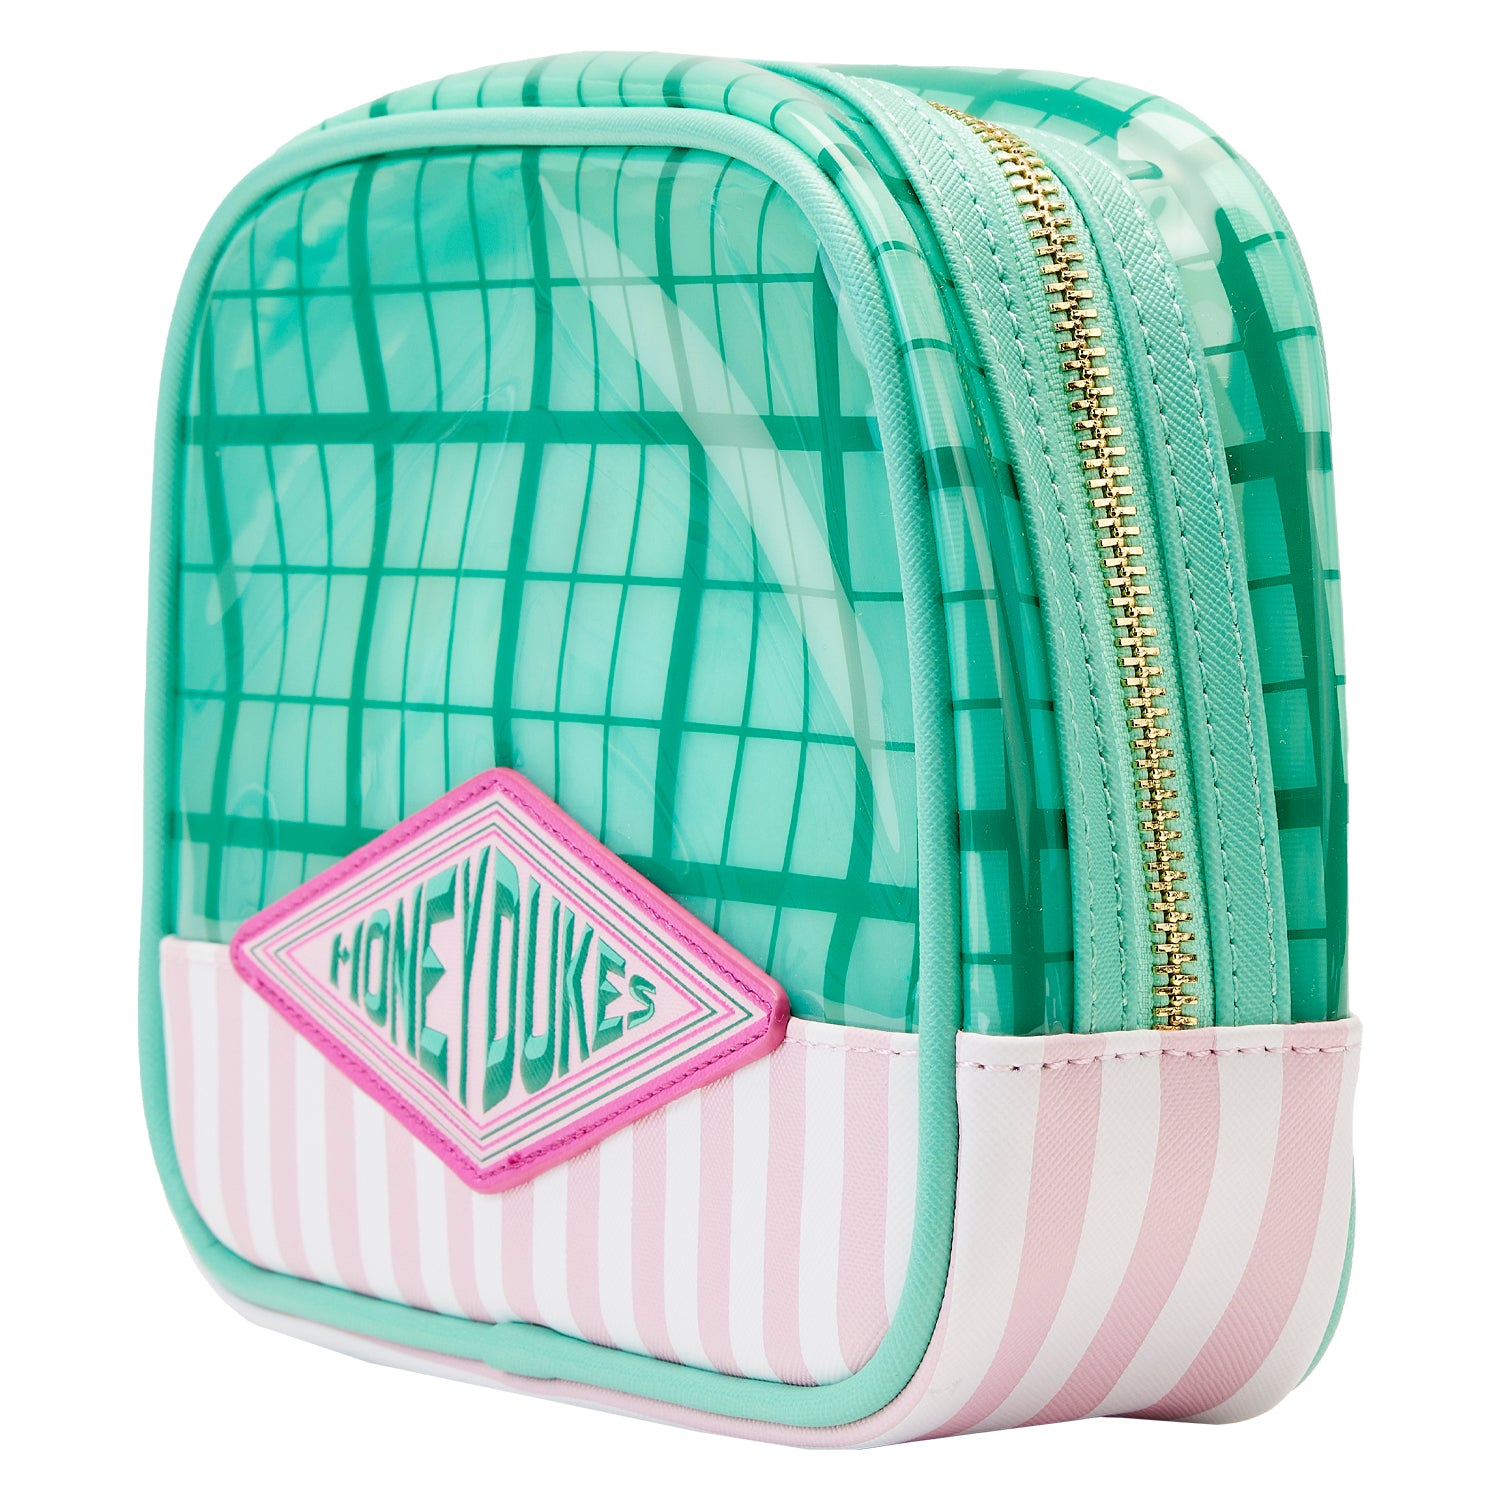 Loungefly Honeydukes Travel Cosmetic Bags Set, 2 Pieces (One Size, Pink Multi)